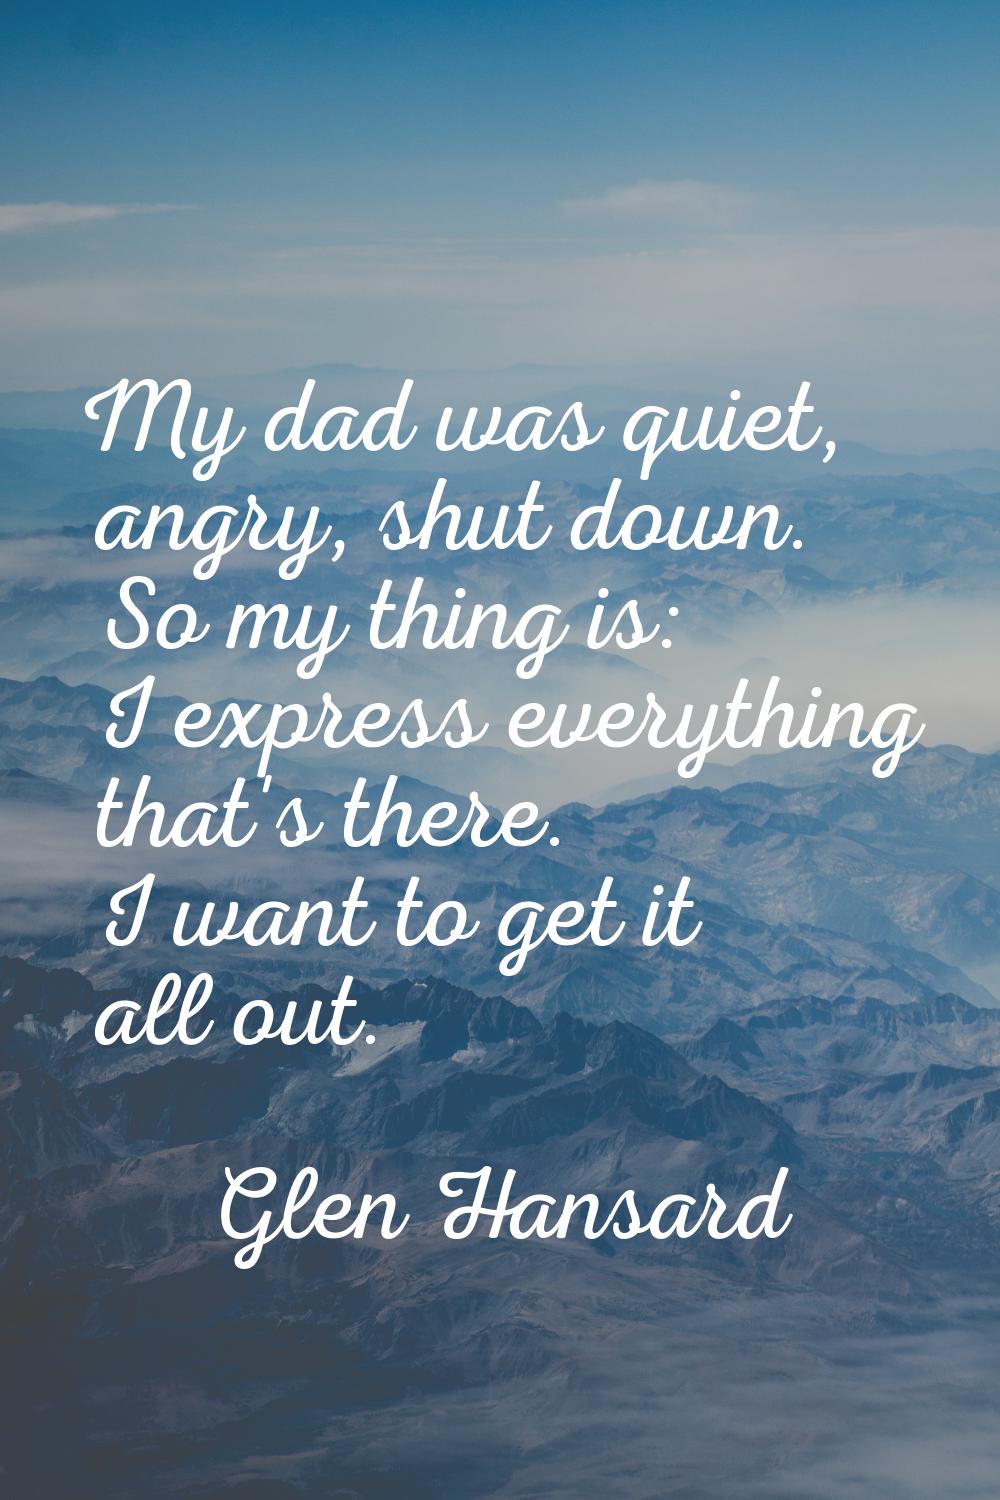 My dad was quiet, angry, shut down. So my thing is: I express everything that's there. I want to ge